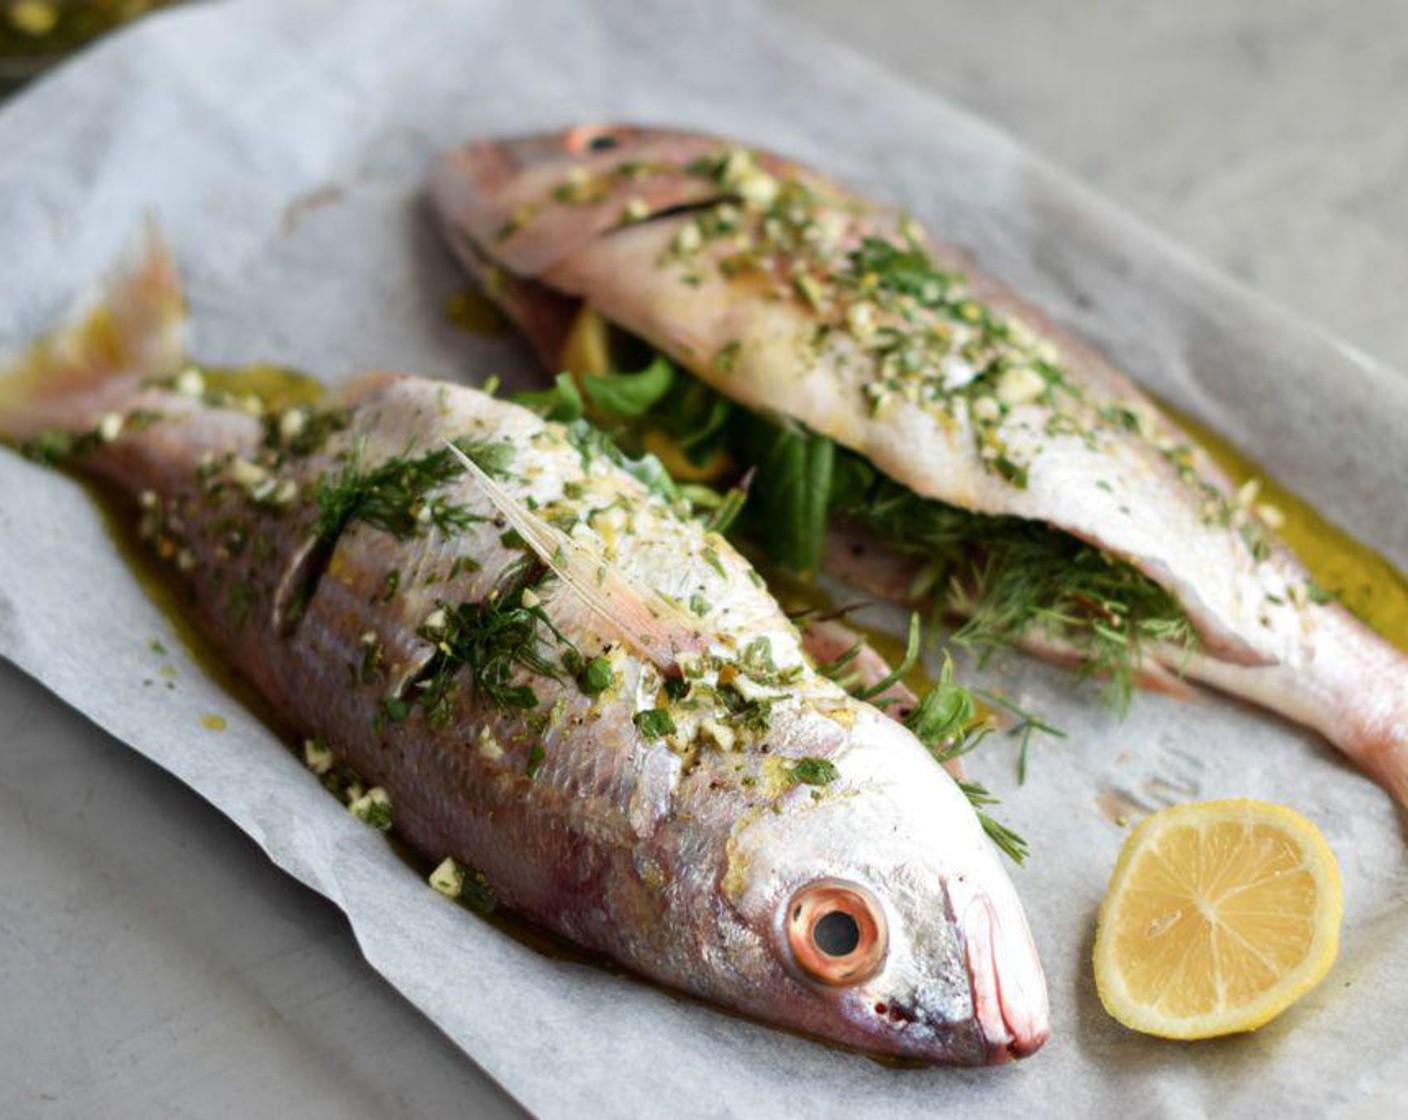 step 5 Roast the fish at 180 degrees C (350 degrees F) for 20 to 24 minutes until the flesh is no longer translucent and it pulls away easily from the skin. Remove the herb bouquets and serve the silvers immediately with a simple green salad and a loaf of crusty bread.